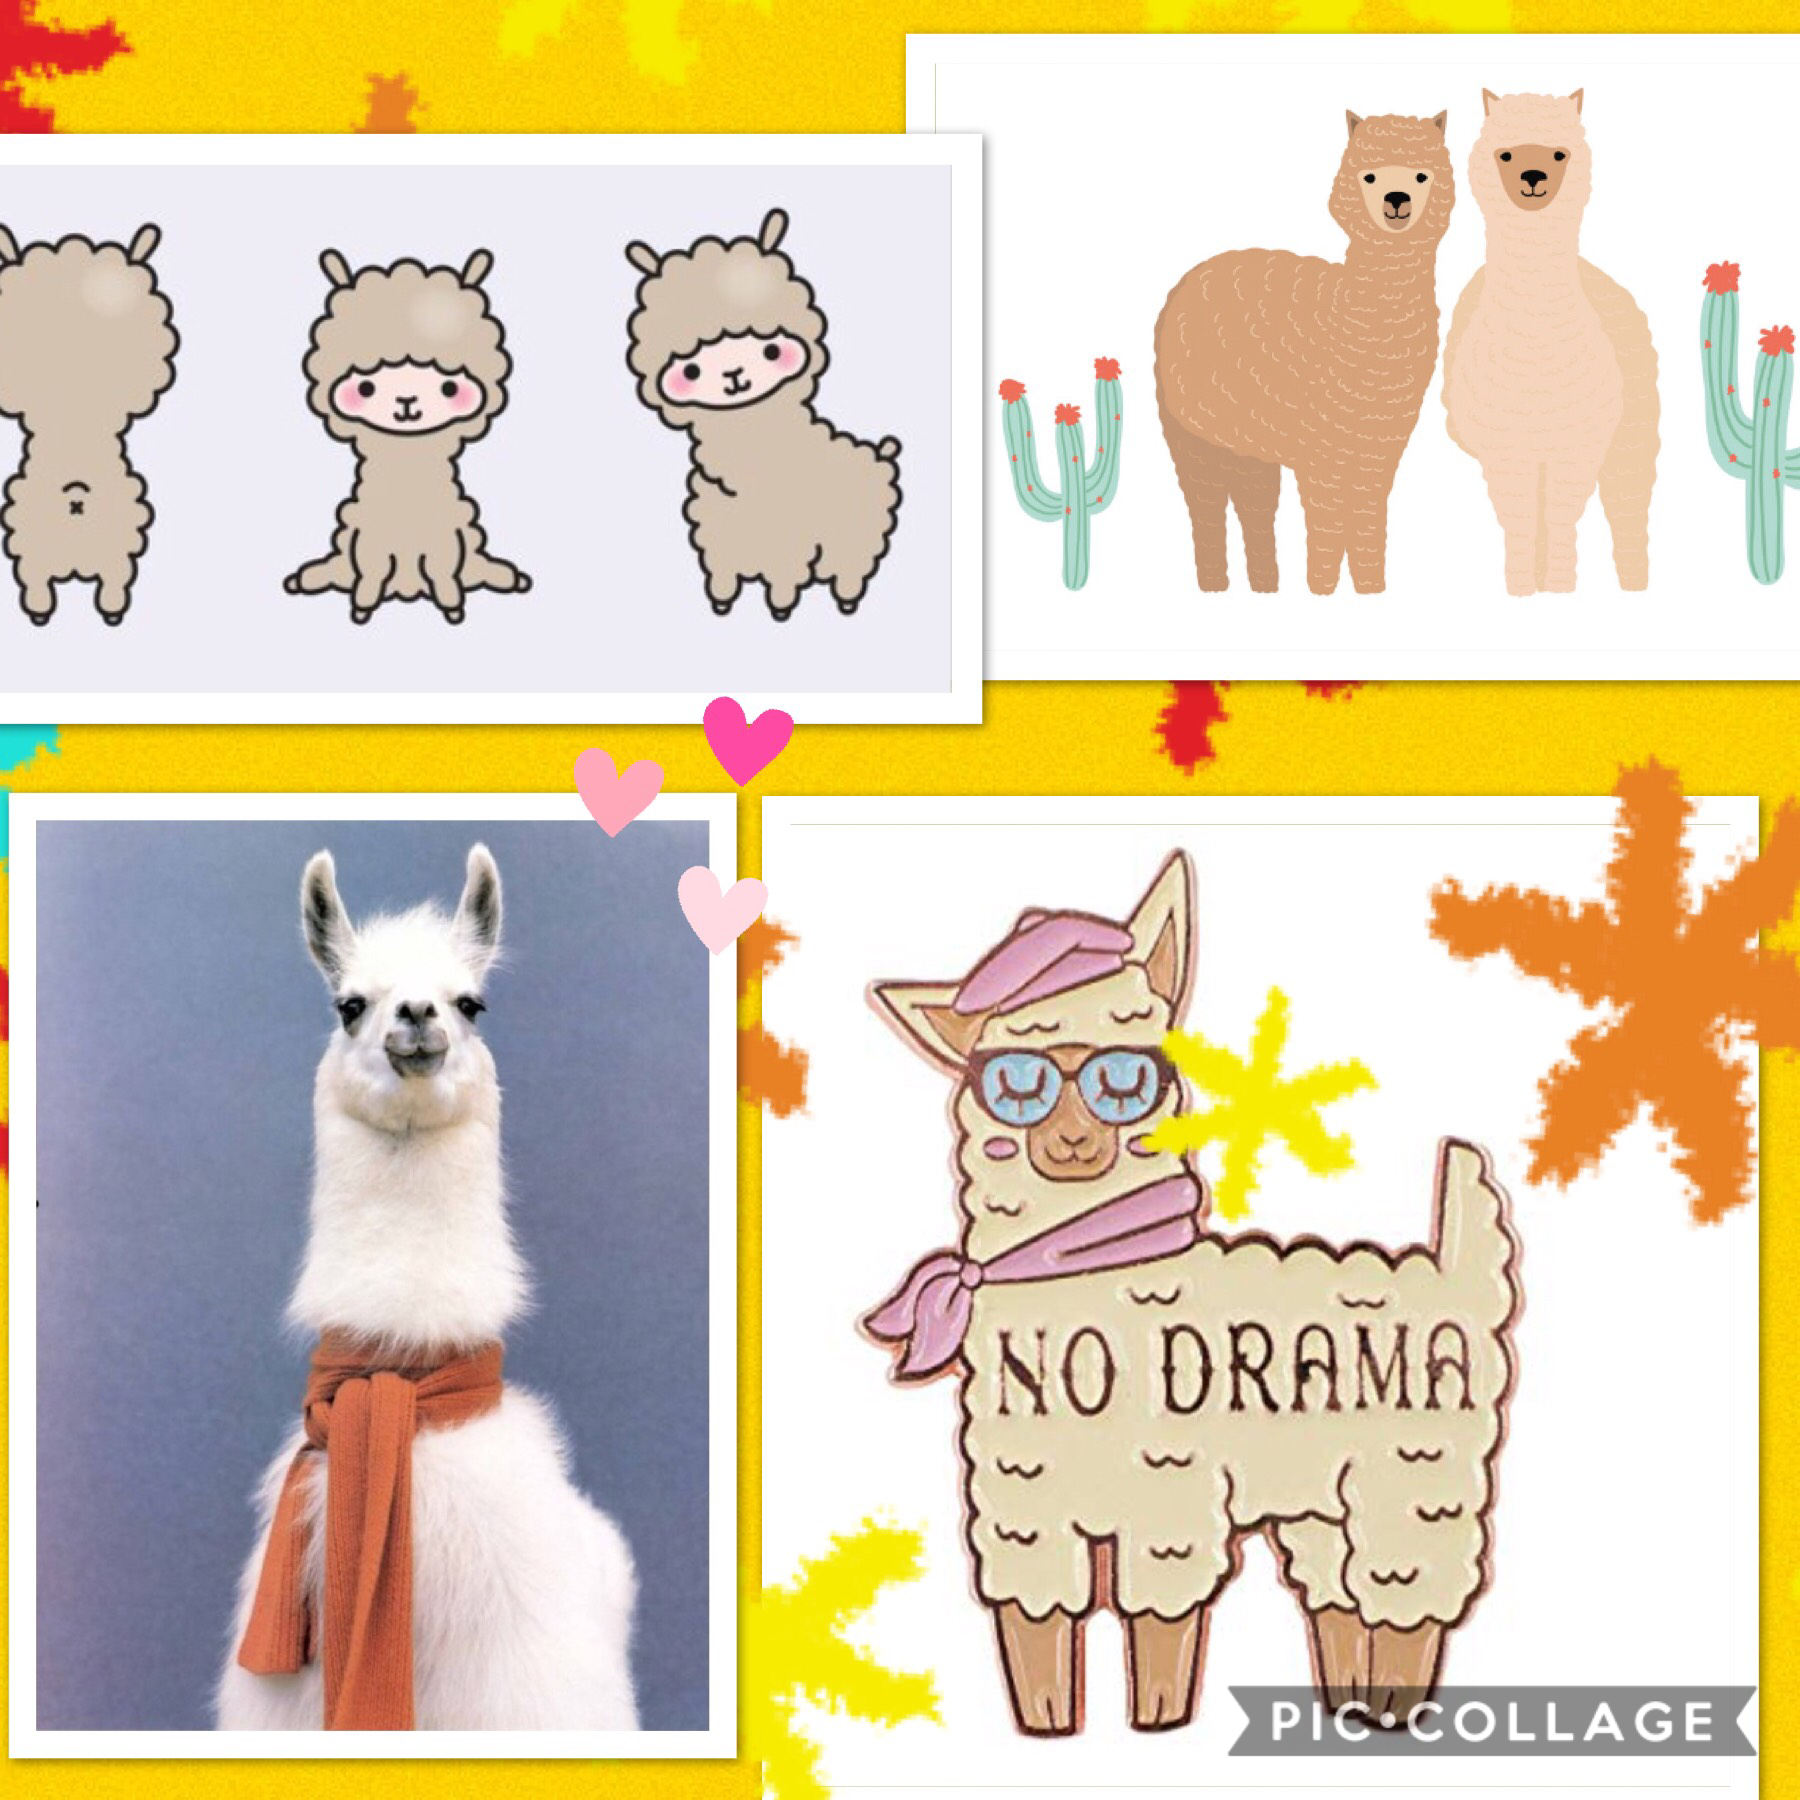 I've been loving llama's there so cute ☺️